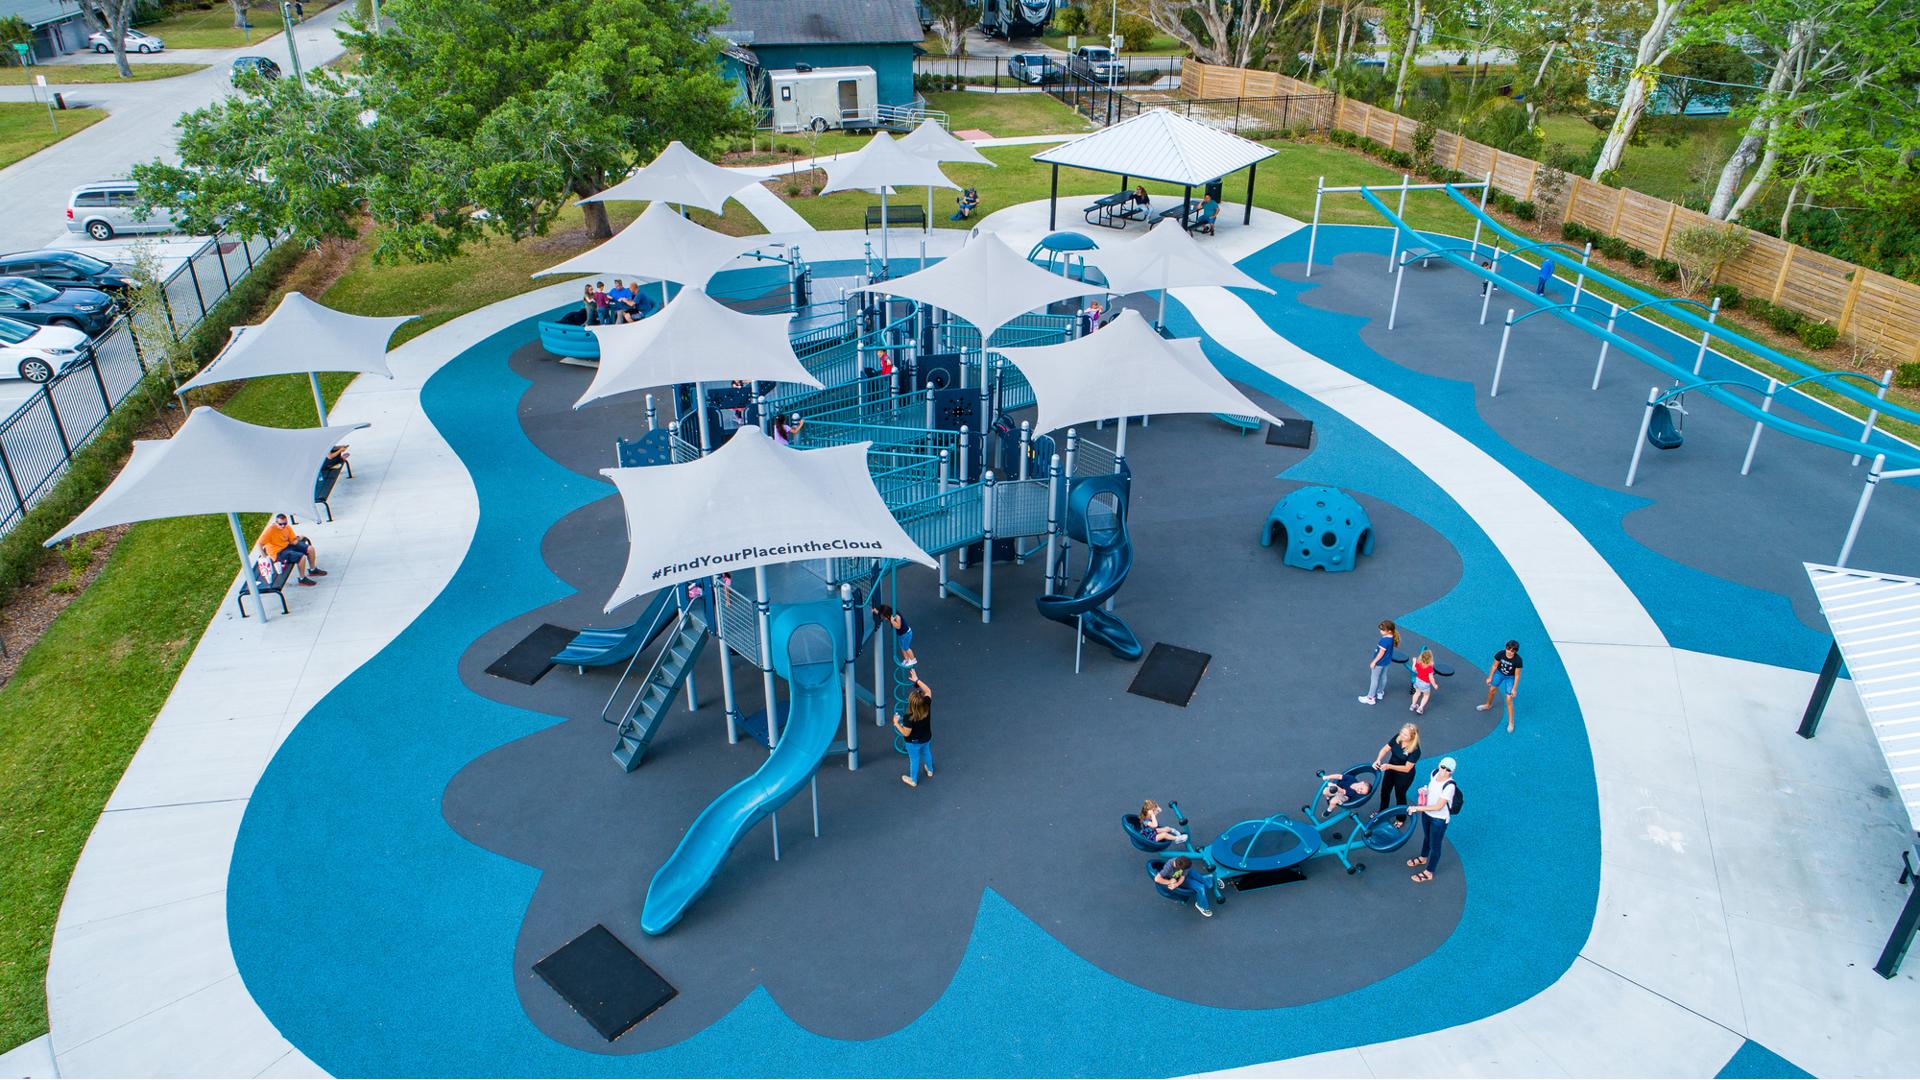 Families play on a inclusive playground colored with different shades of blue equipt with ramps, slides, climbers, and inclusive see-saws and gliders.